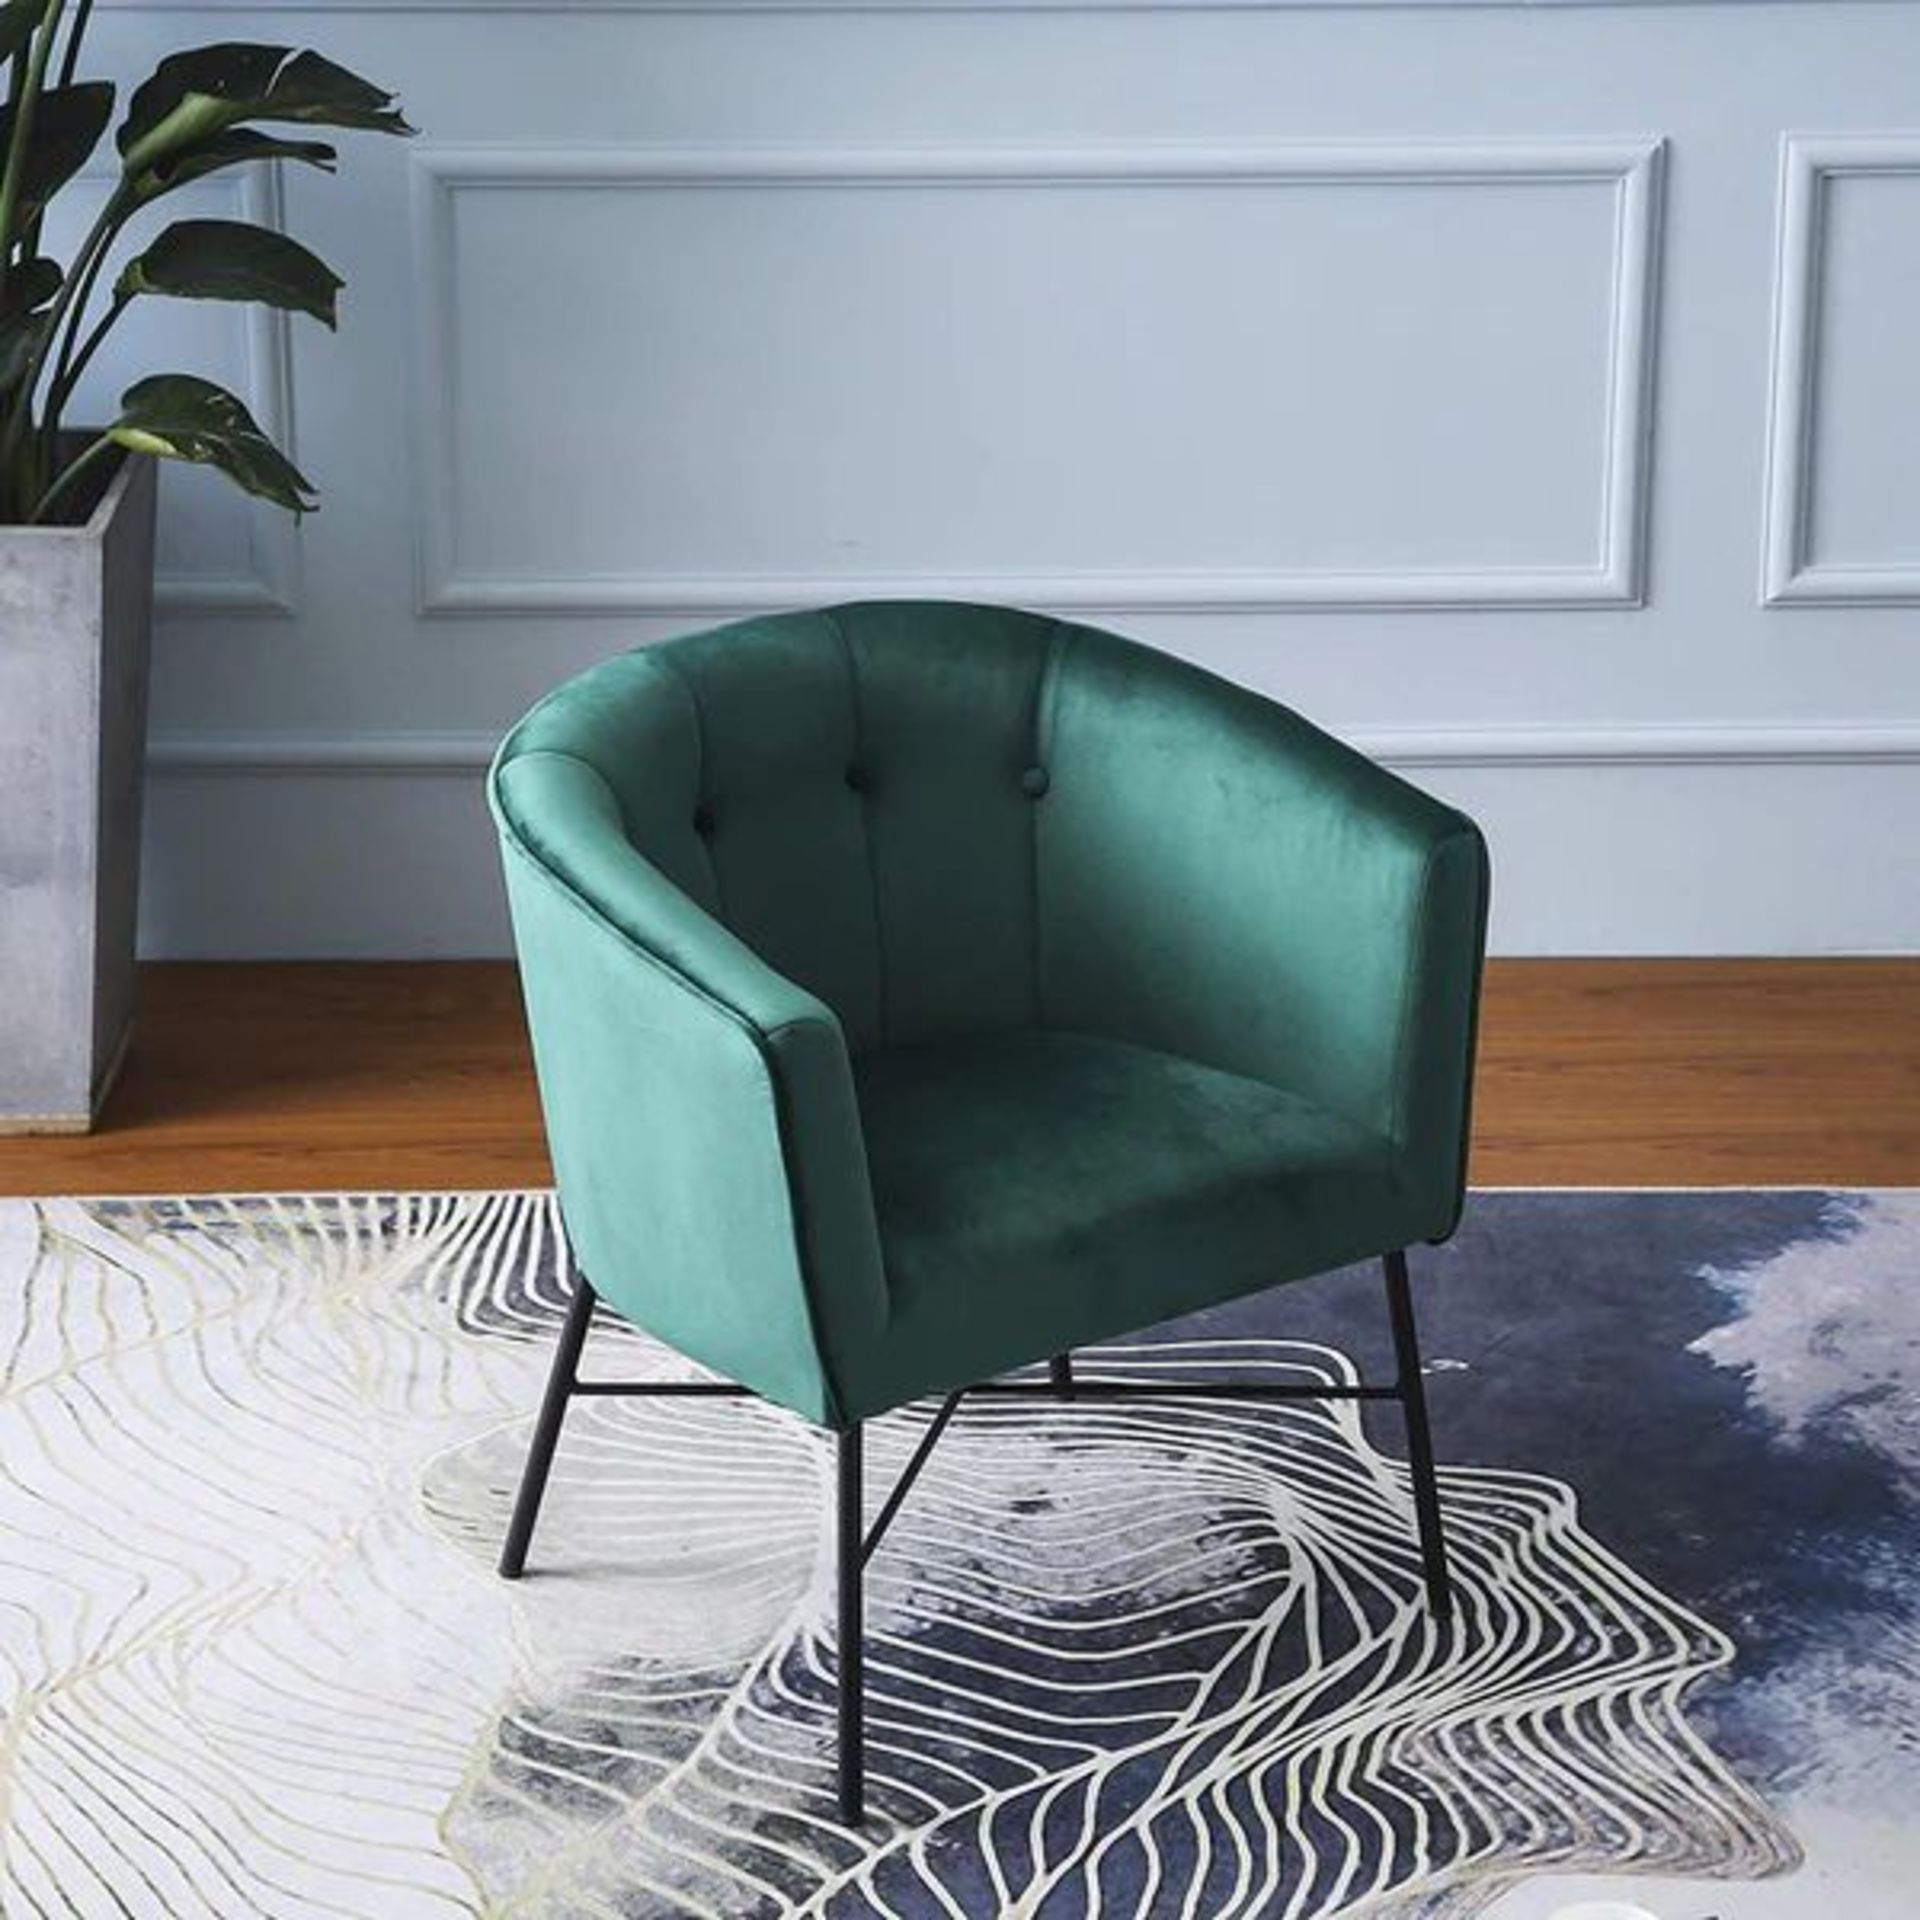 Aurelie Tub Chair in Emerald Green Velvet. - R14. RRP £239.99. With buttoned backrest and body - Image 2 of 2